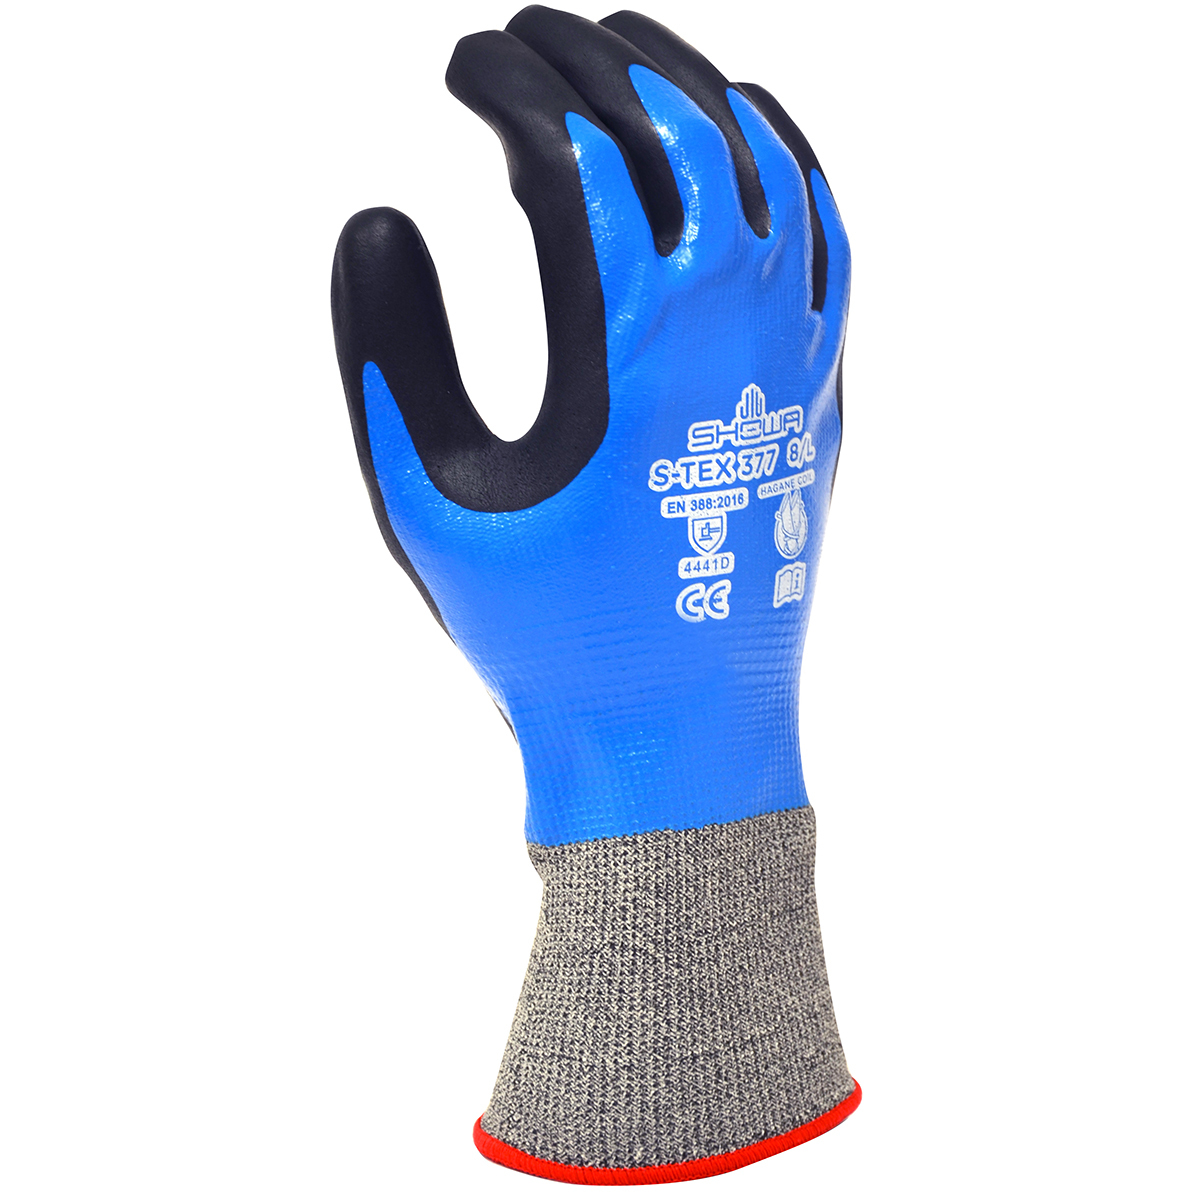 SHOWA® S-TEX® 377 13 Gauge Hagane Coil® And Polyester And Stainless Steel Cut Resistant Gloves